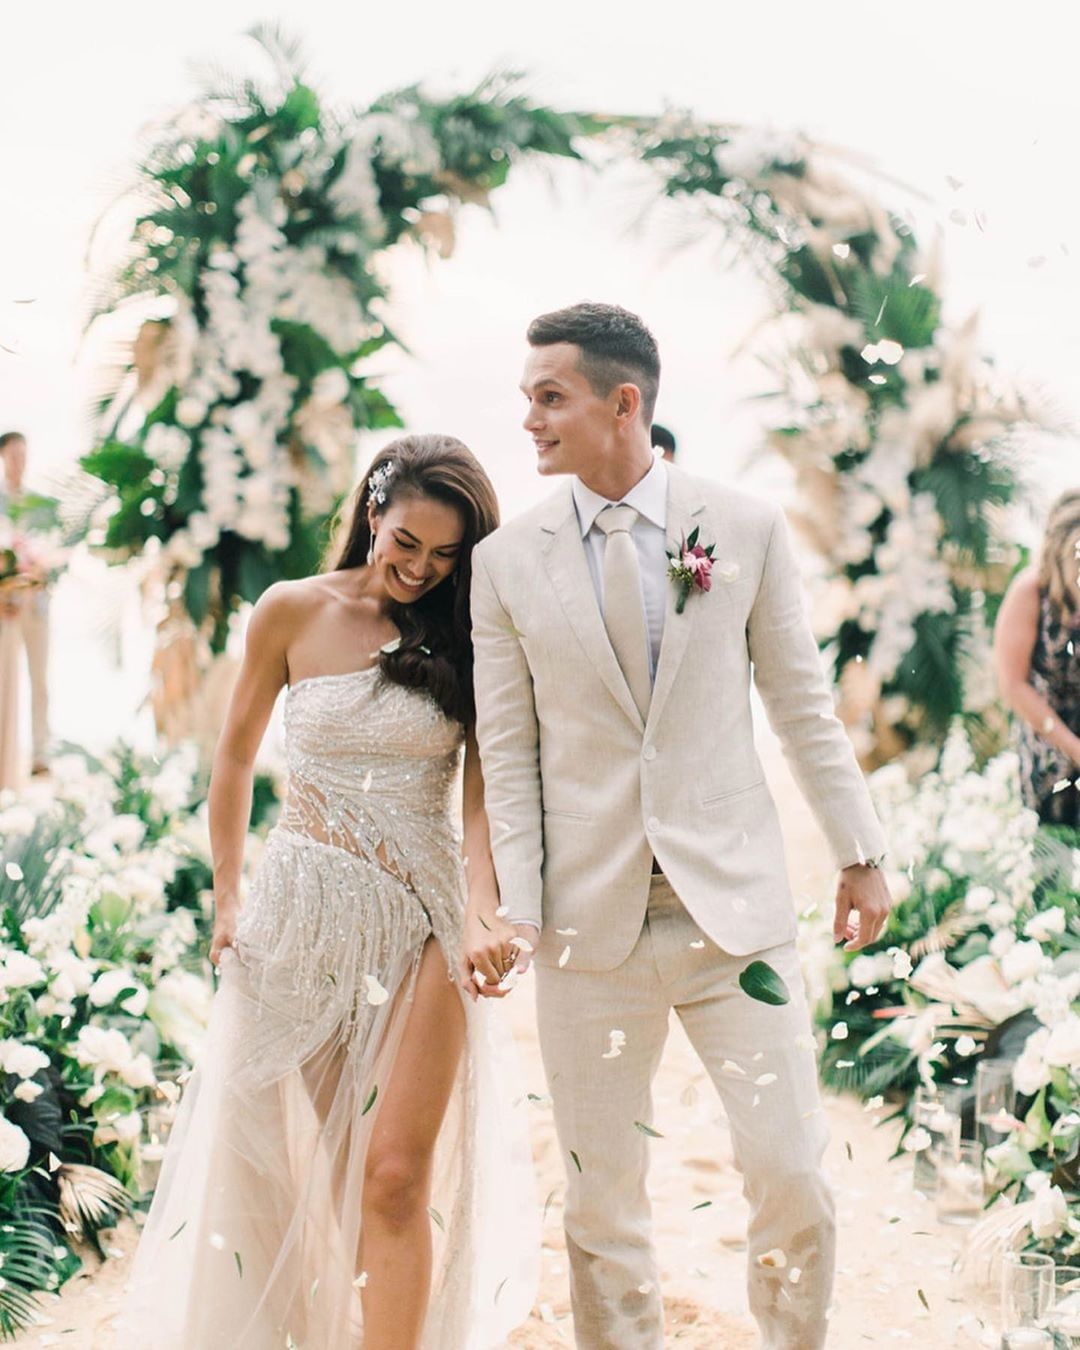 Thailand wedding with a palm frond and white flower arch, sexy glittery wedding dress and tan groom suit